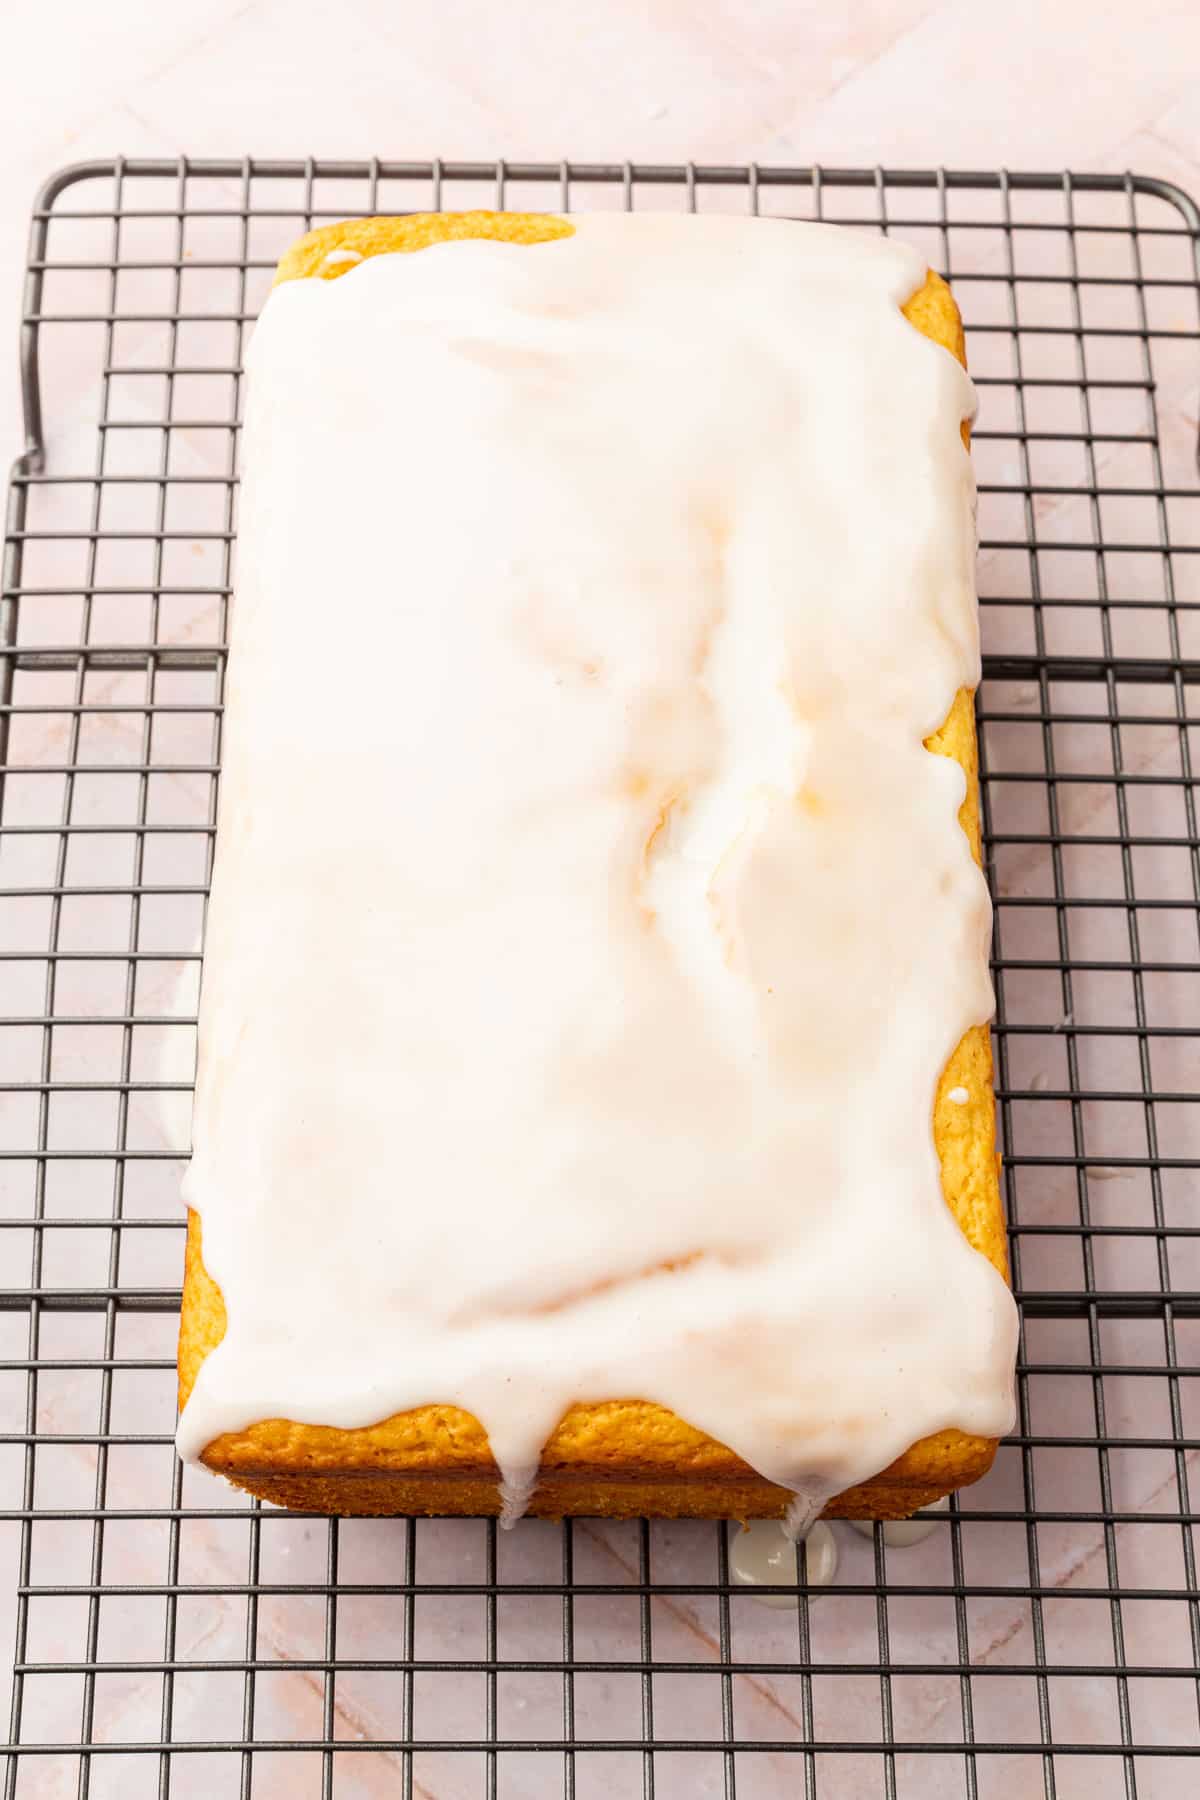 A lemon loaf topped with a white glaze on a cooling rack.